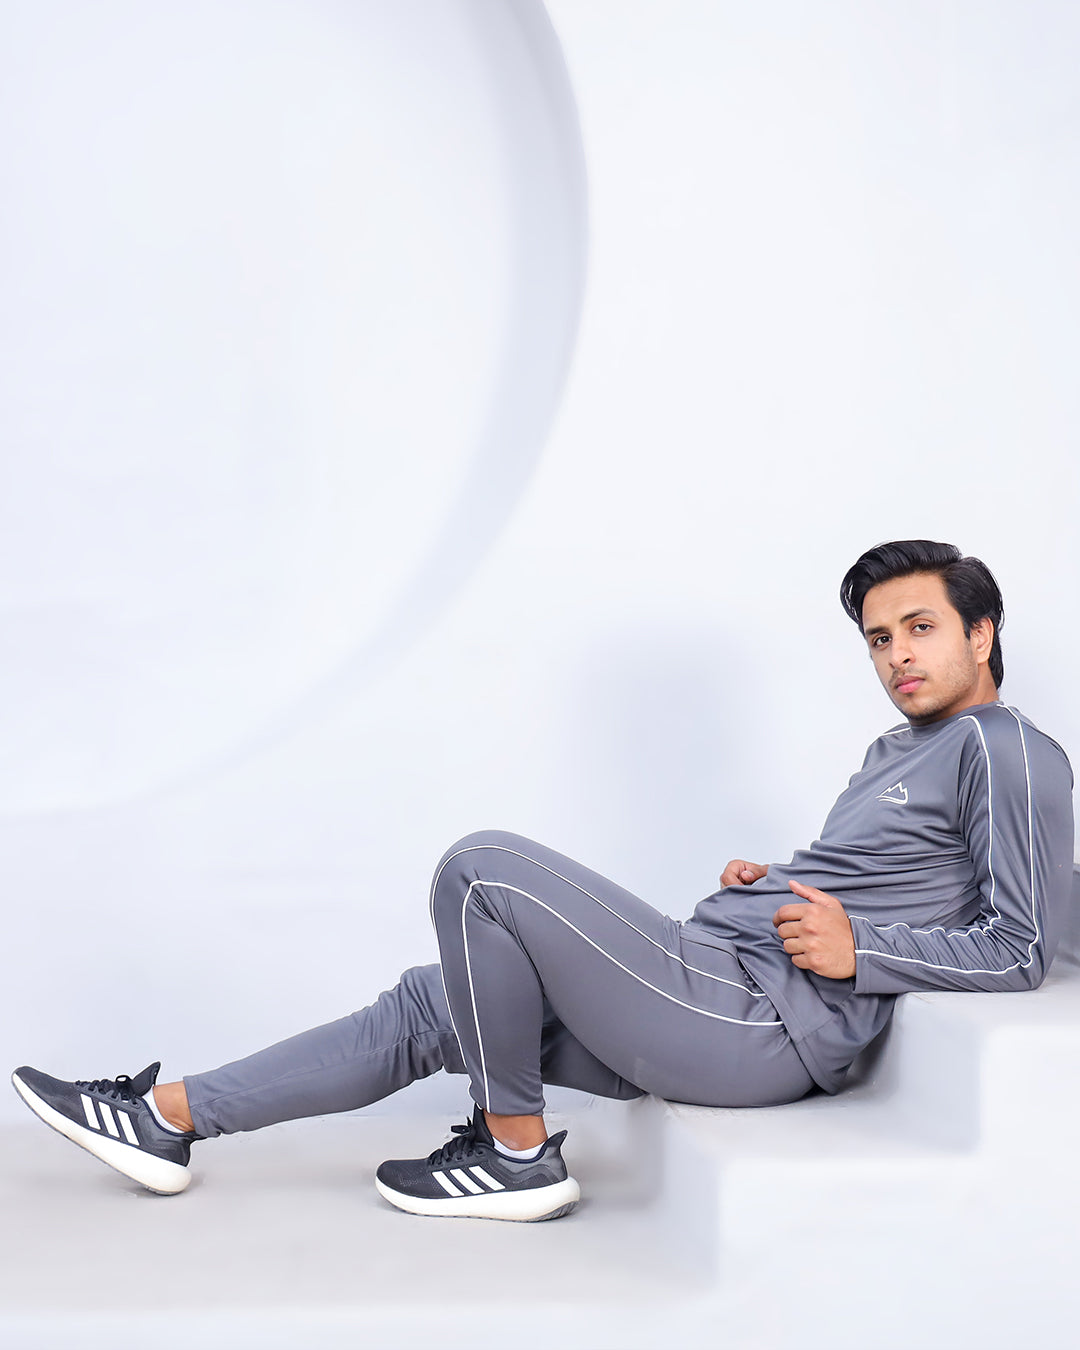 Grey Liner Track Suit Full Sleeve